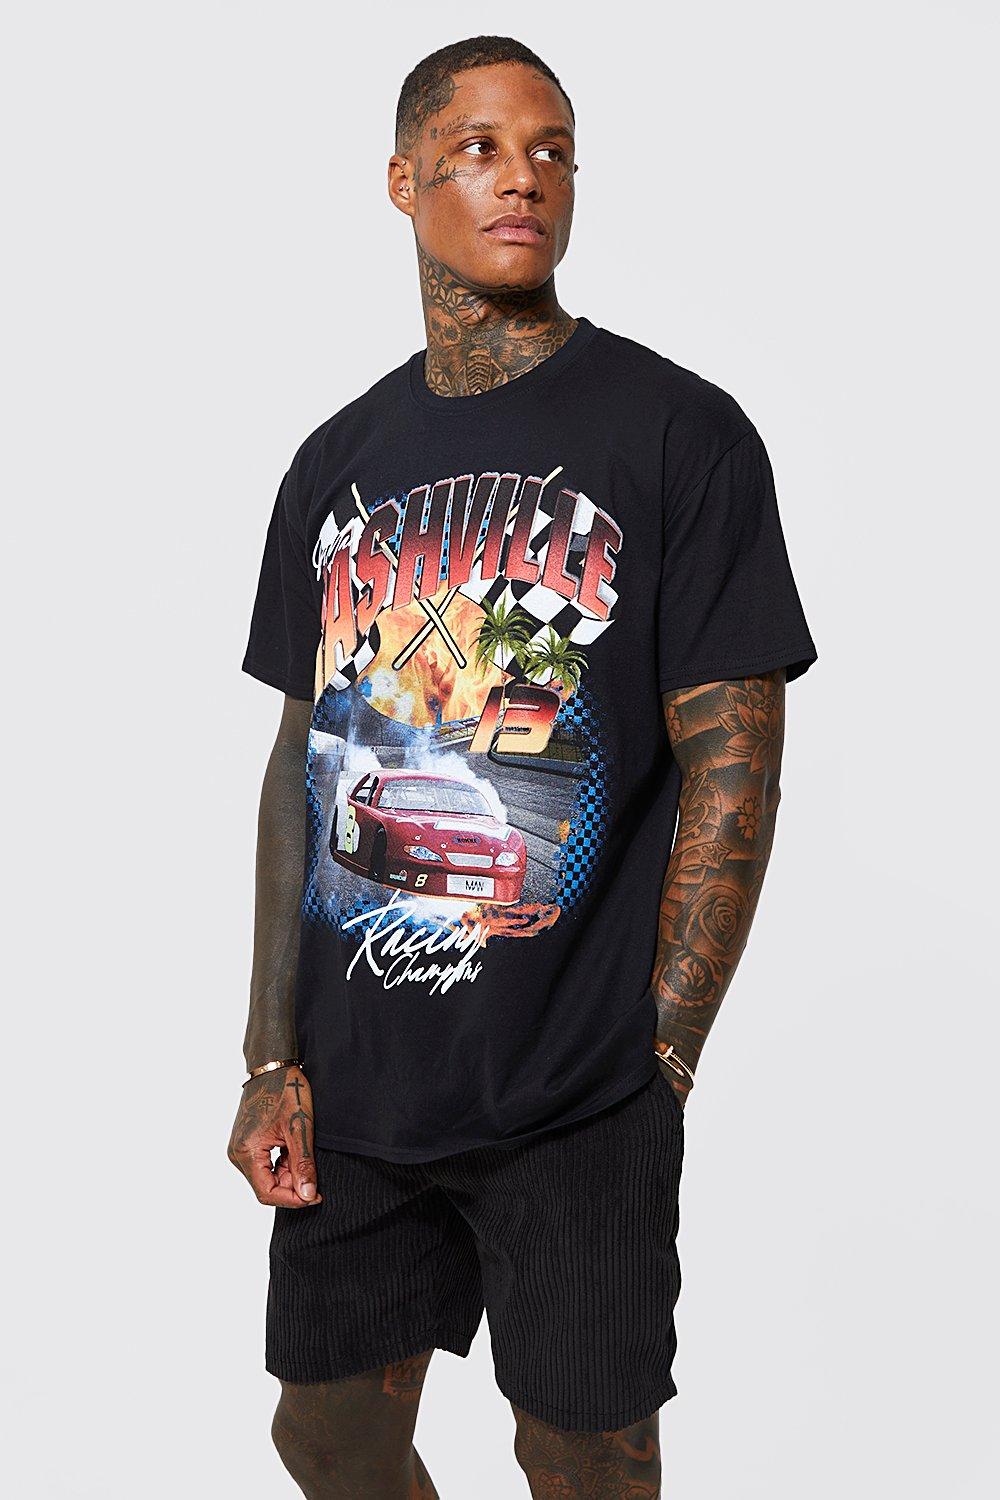 Printed T-shirts- Black Oversized T-shirts for Men Online